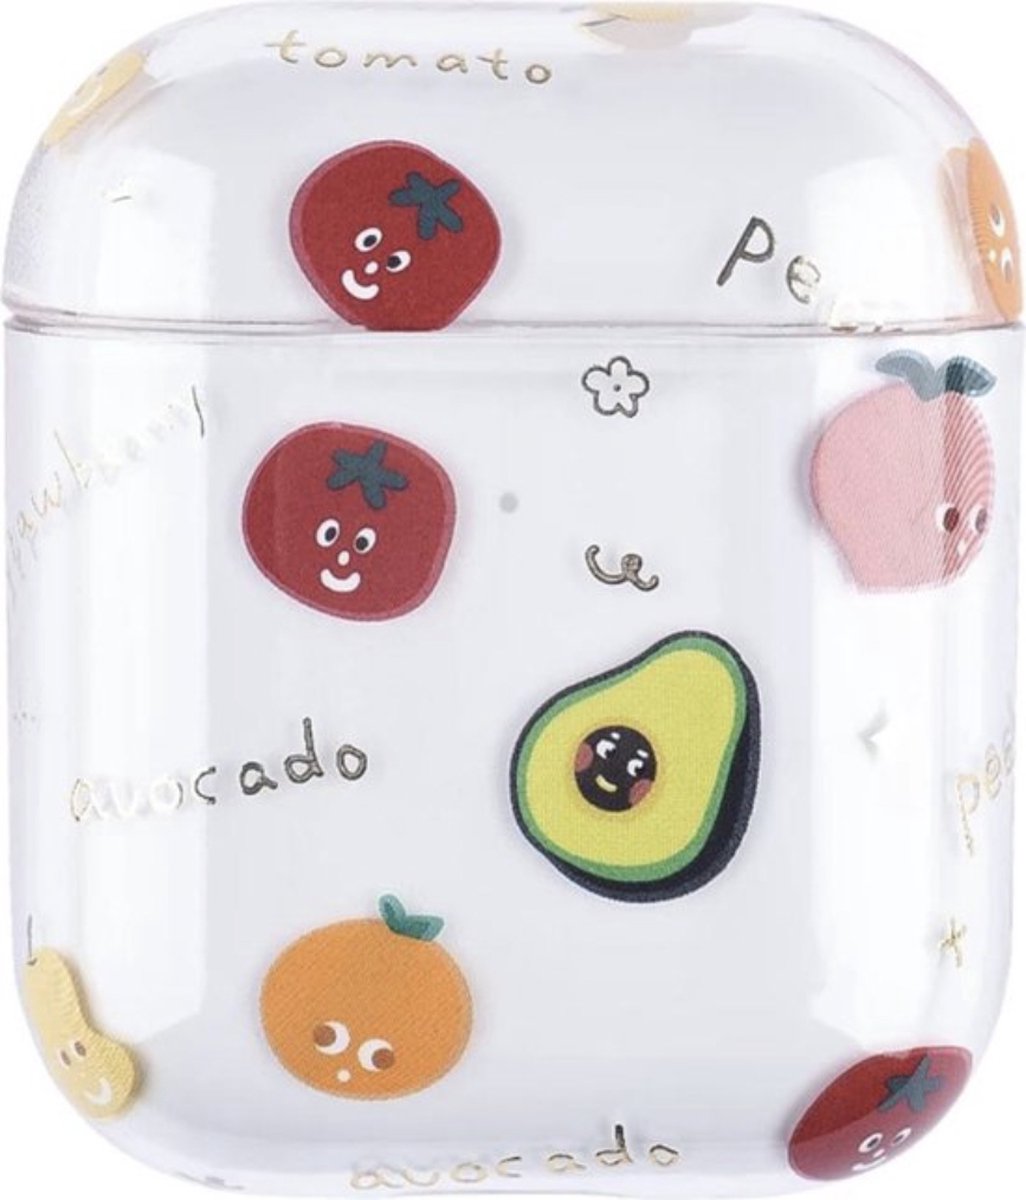 Supertarget - AirPods Case met Fruit- Airpods hoesje - Airpods case Strawberry Avocado Peach Tomato Pear - Beschermhoes voor AirPods 1+2